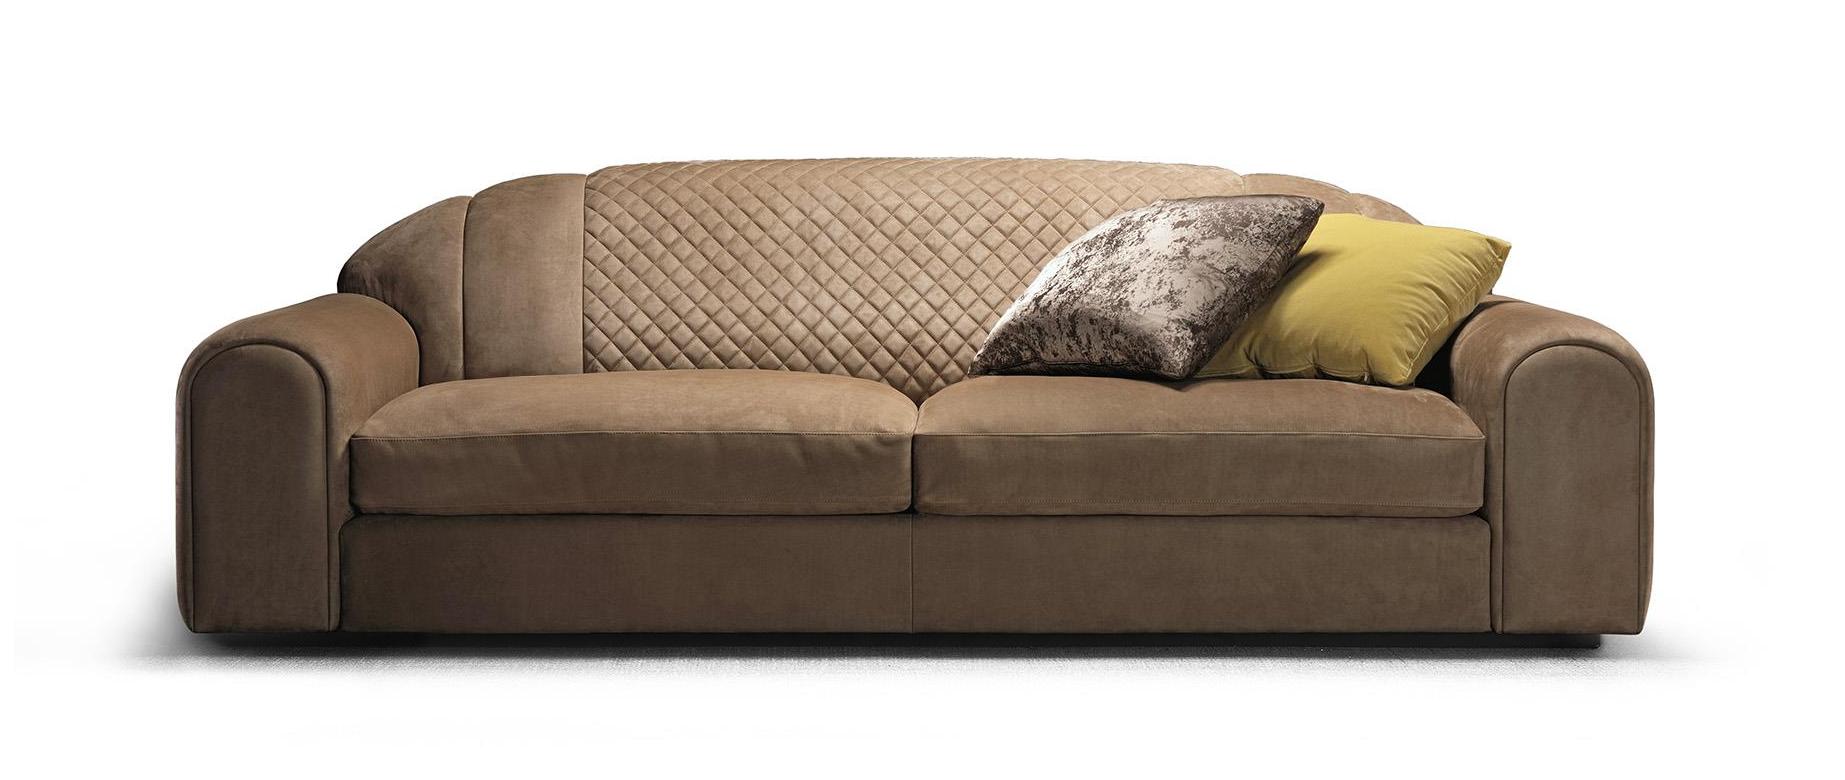 Modern Sofa with Large Seat